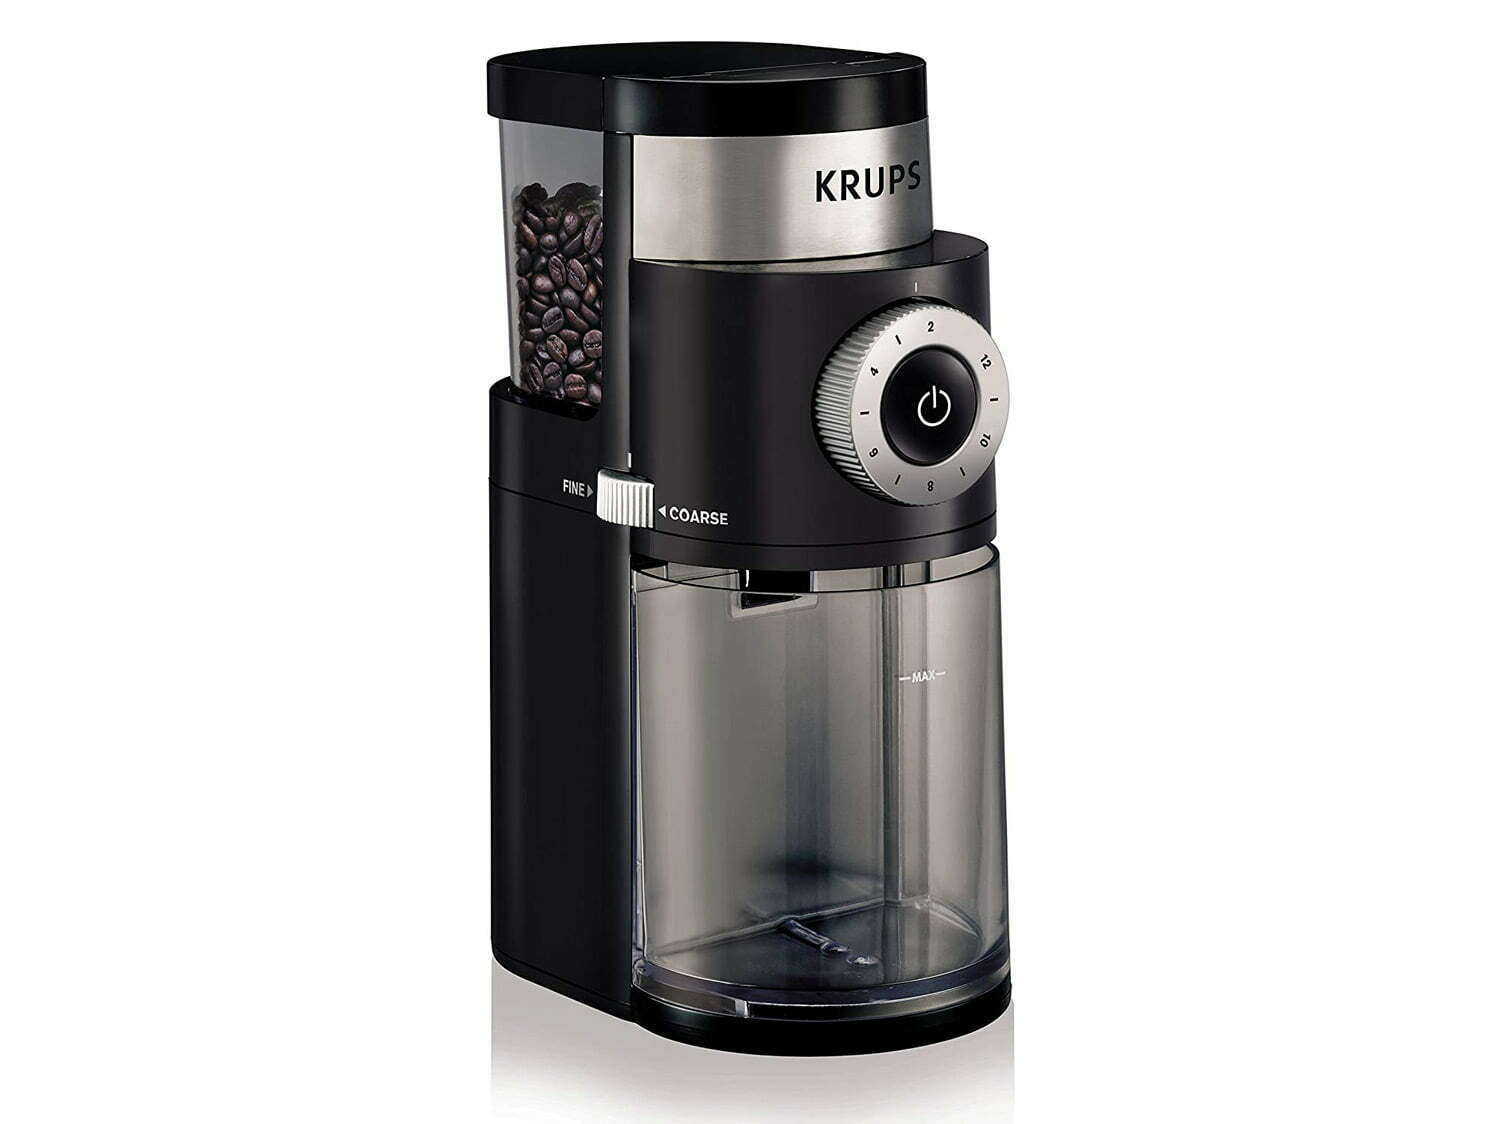 Krups GX5000 Professional Electric Coffee Burr Grinder With Grind Size And Cup Selection